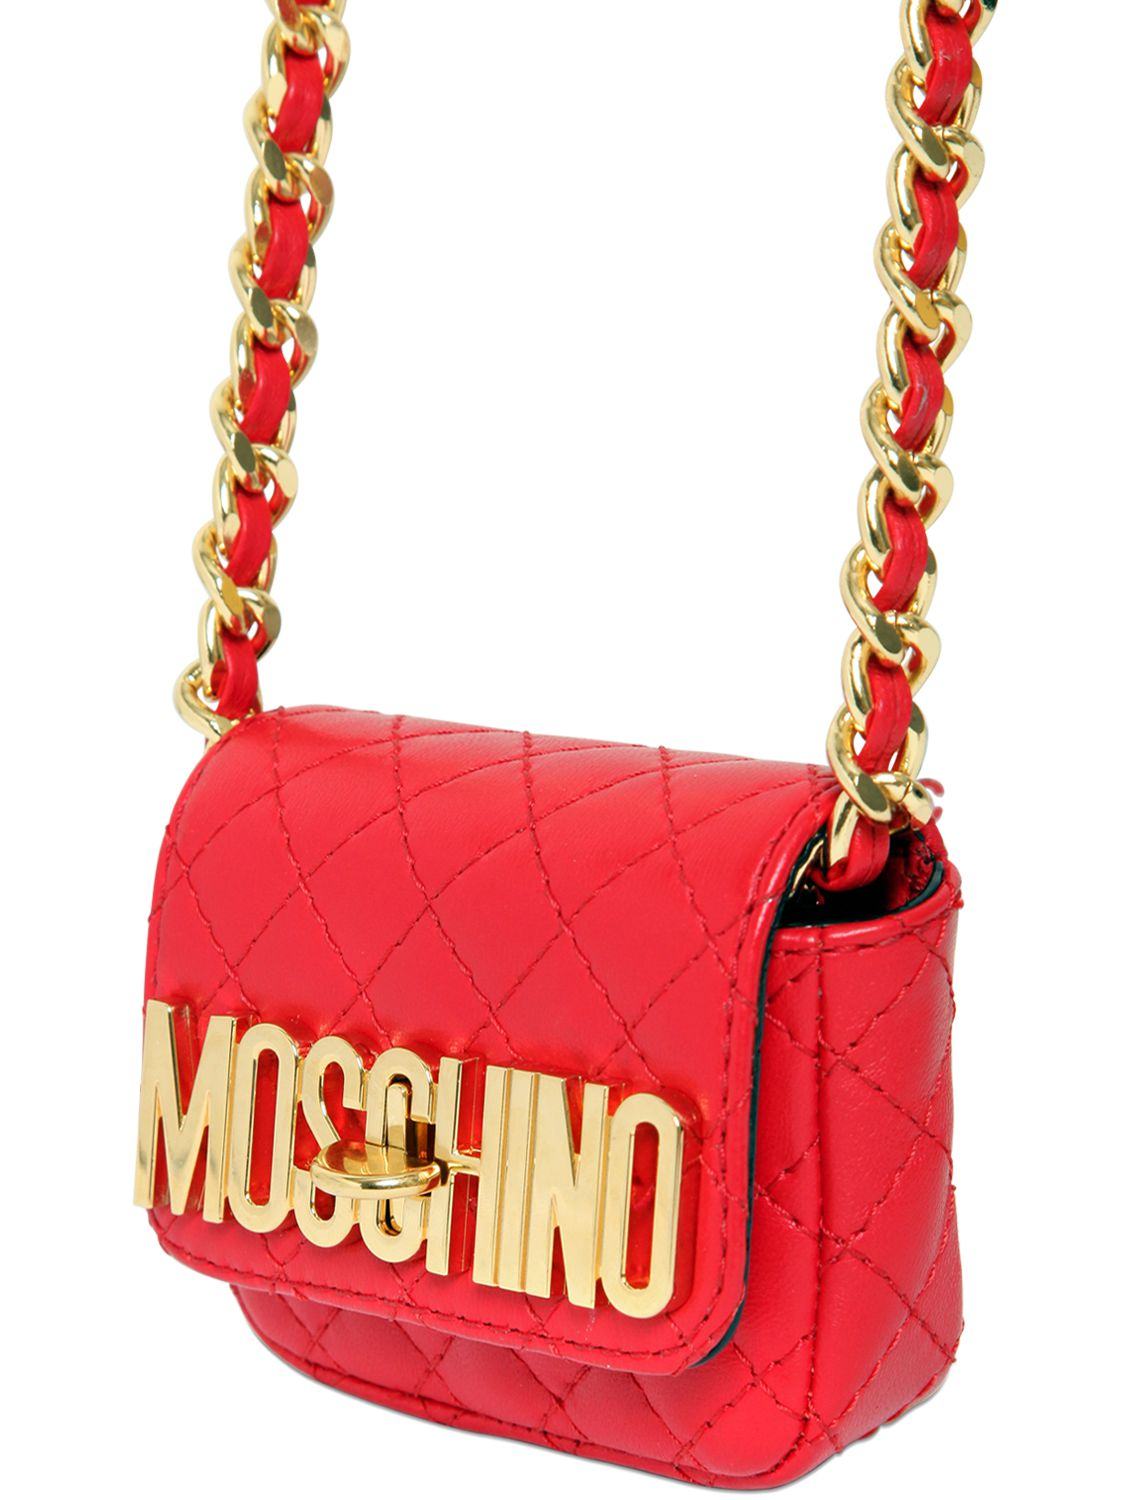 Moschino Fantasy Large Printed Patent Leather Crossbody Bag in Red - Lyst